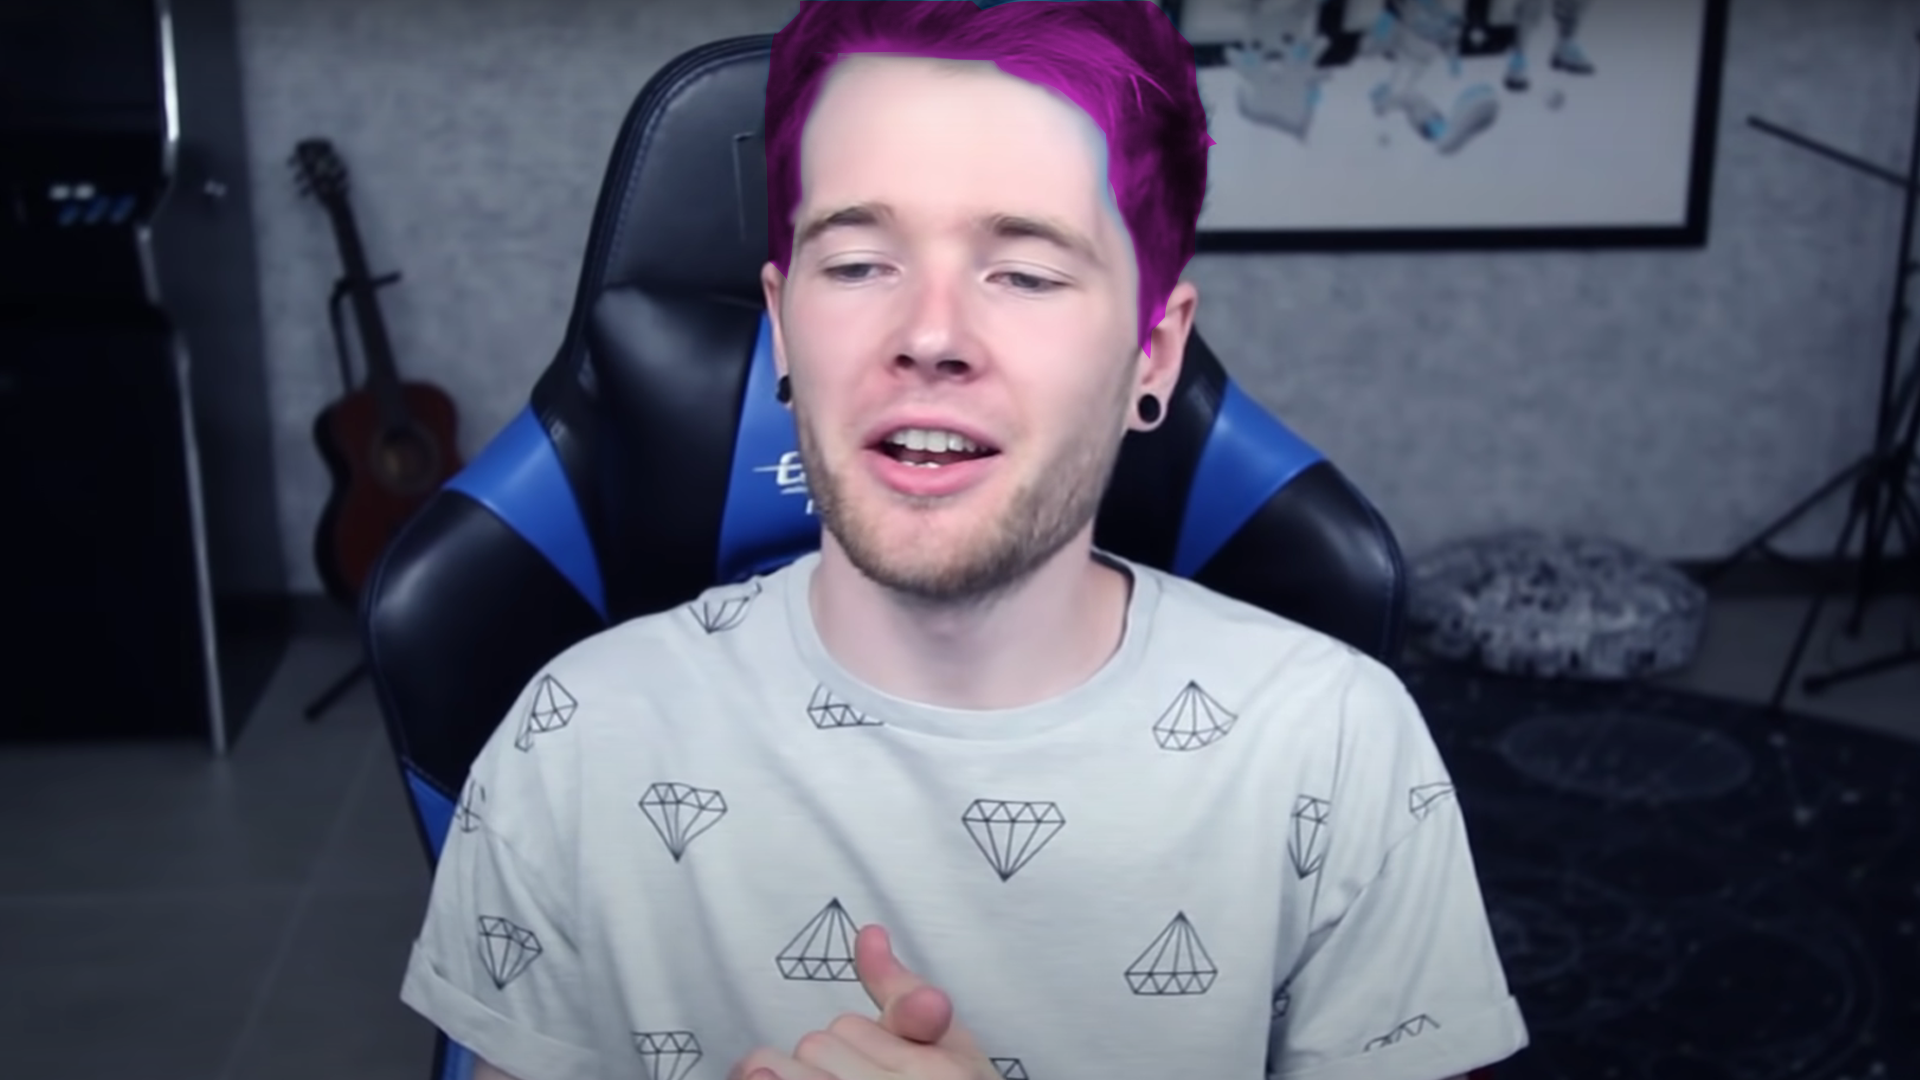 Dantdm's New Hair: The Pink and Blue Color! - wide 4